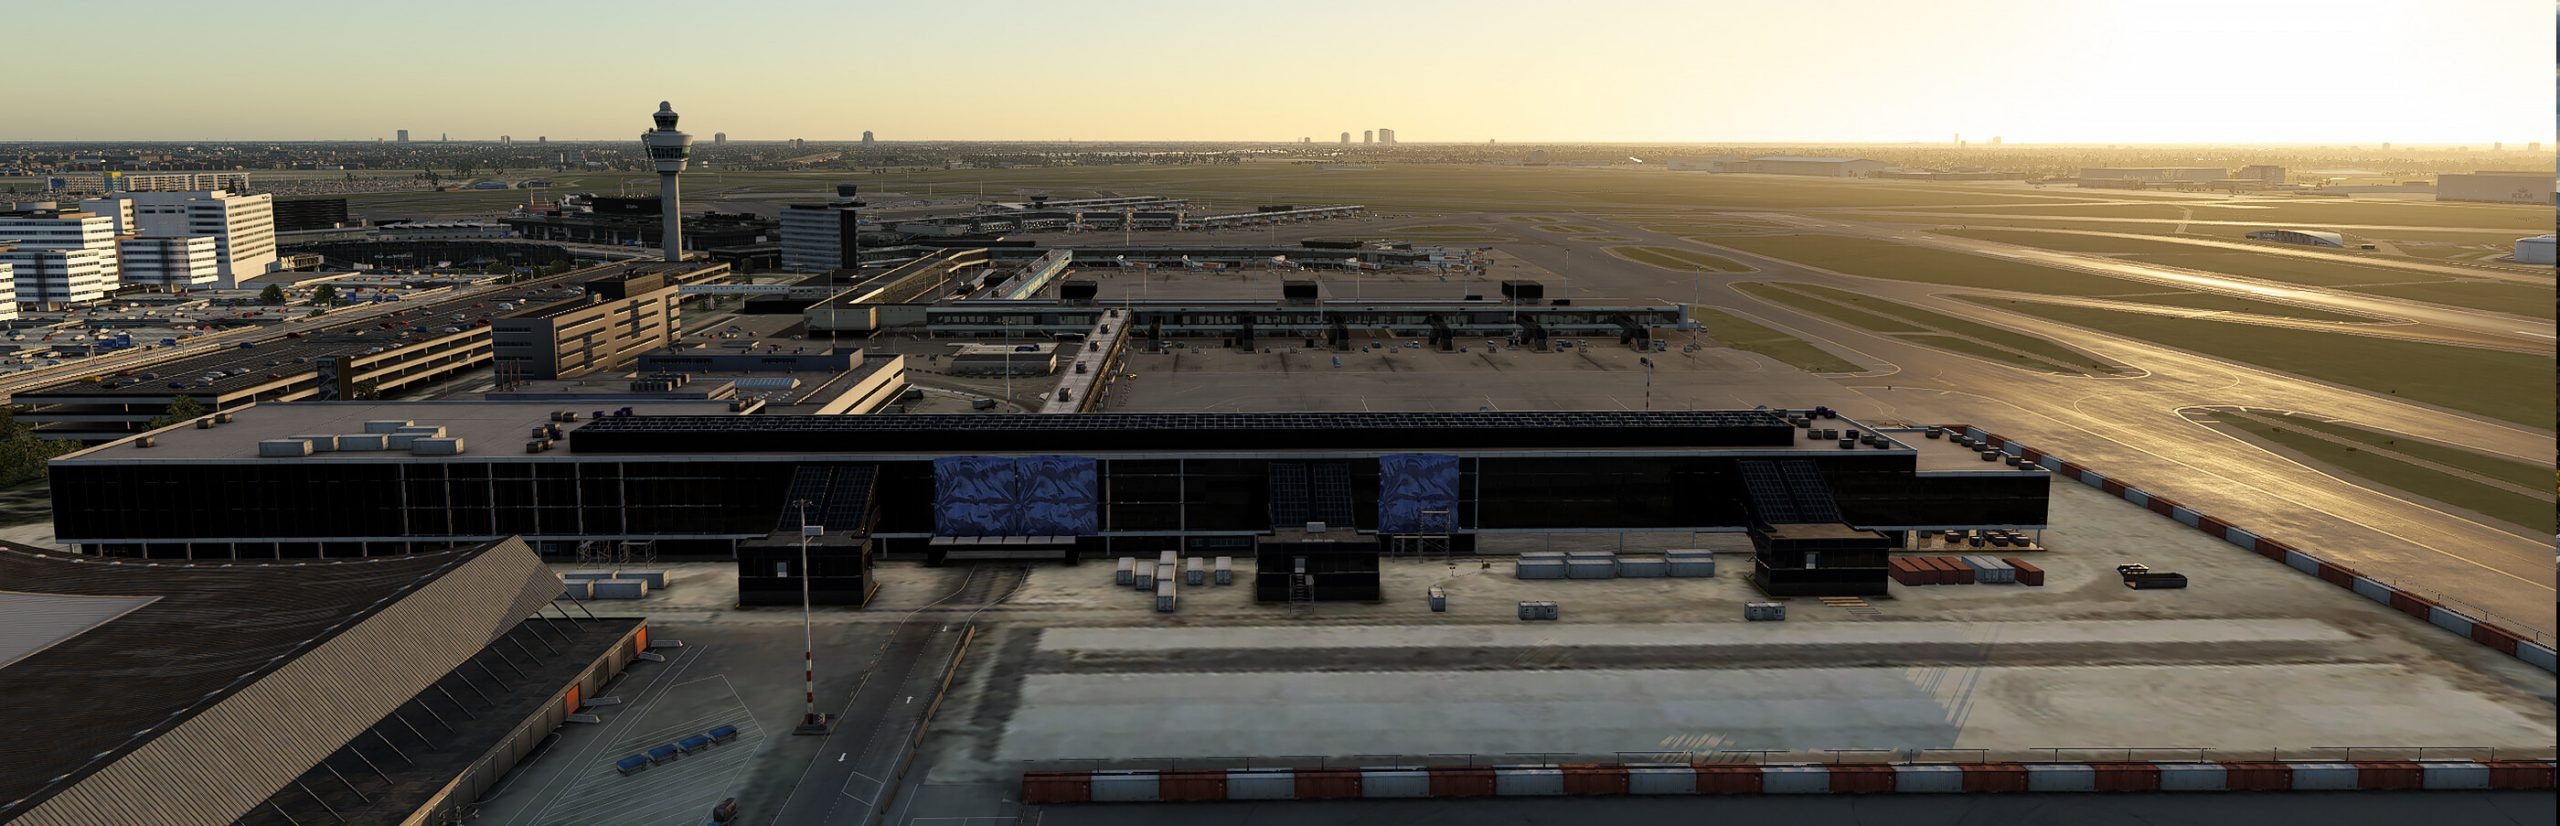 FlyTampa Releases EHAM Amsterdam Airport for XPL